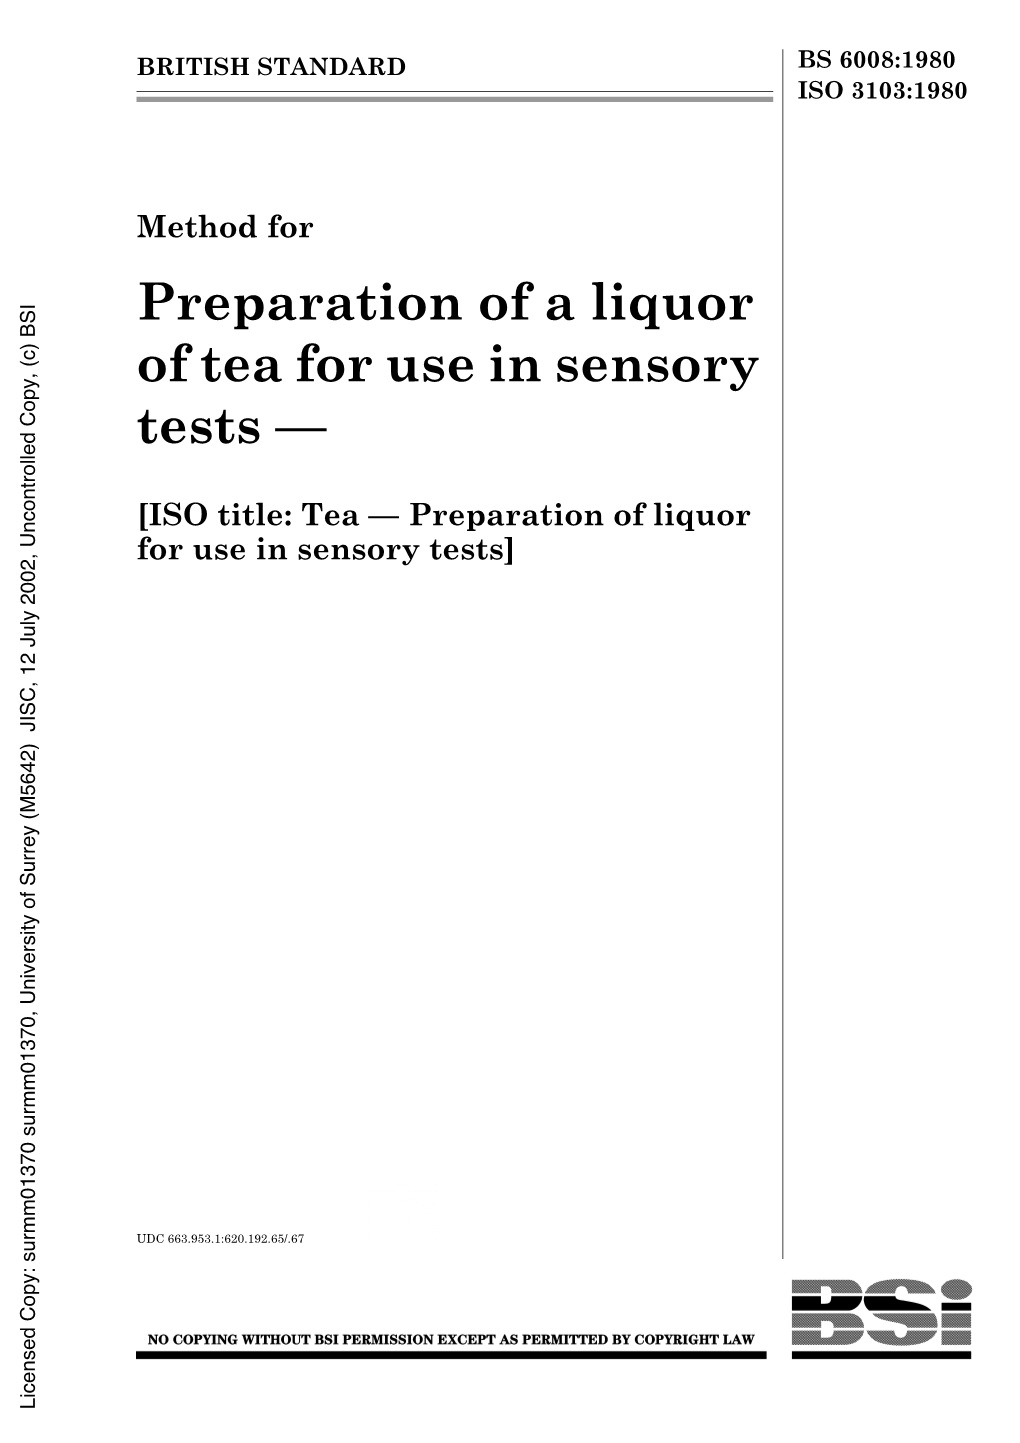 Preparation of a Liquor of Tea for Use in Sensory Tests —